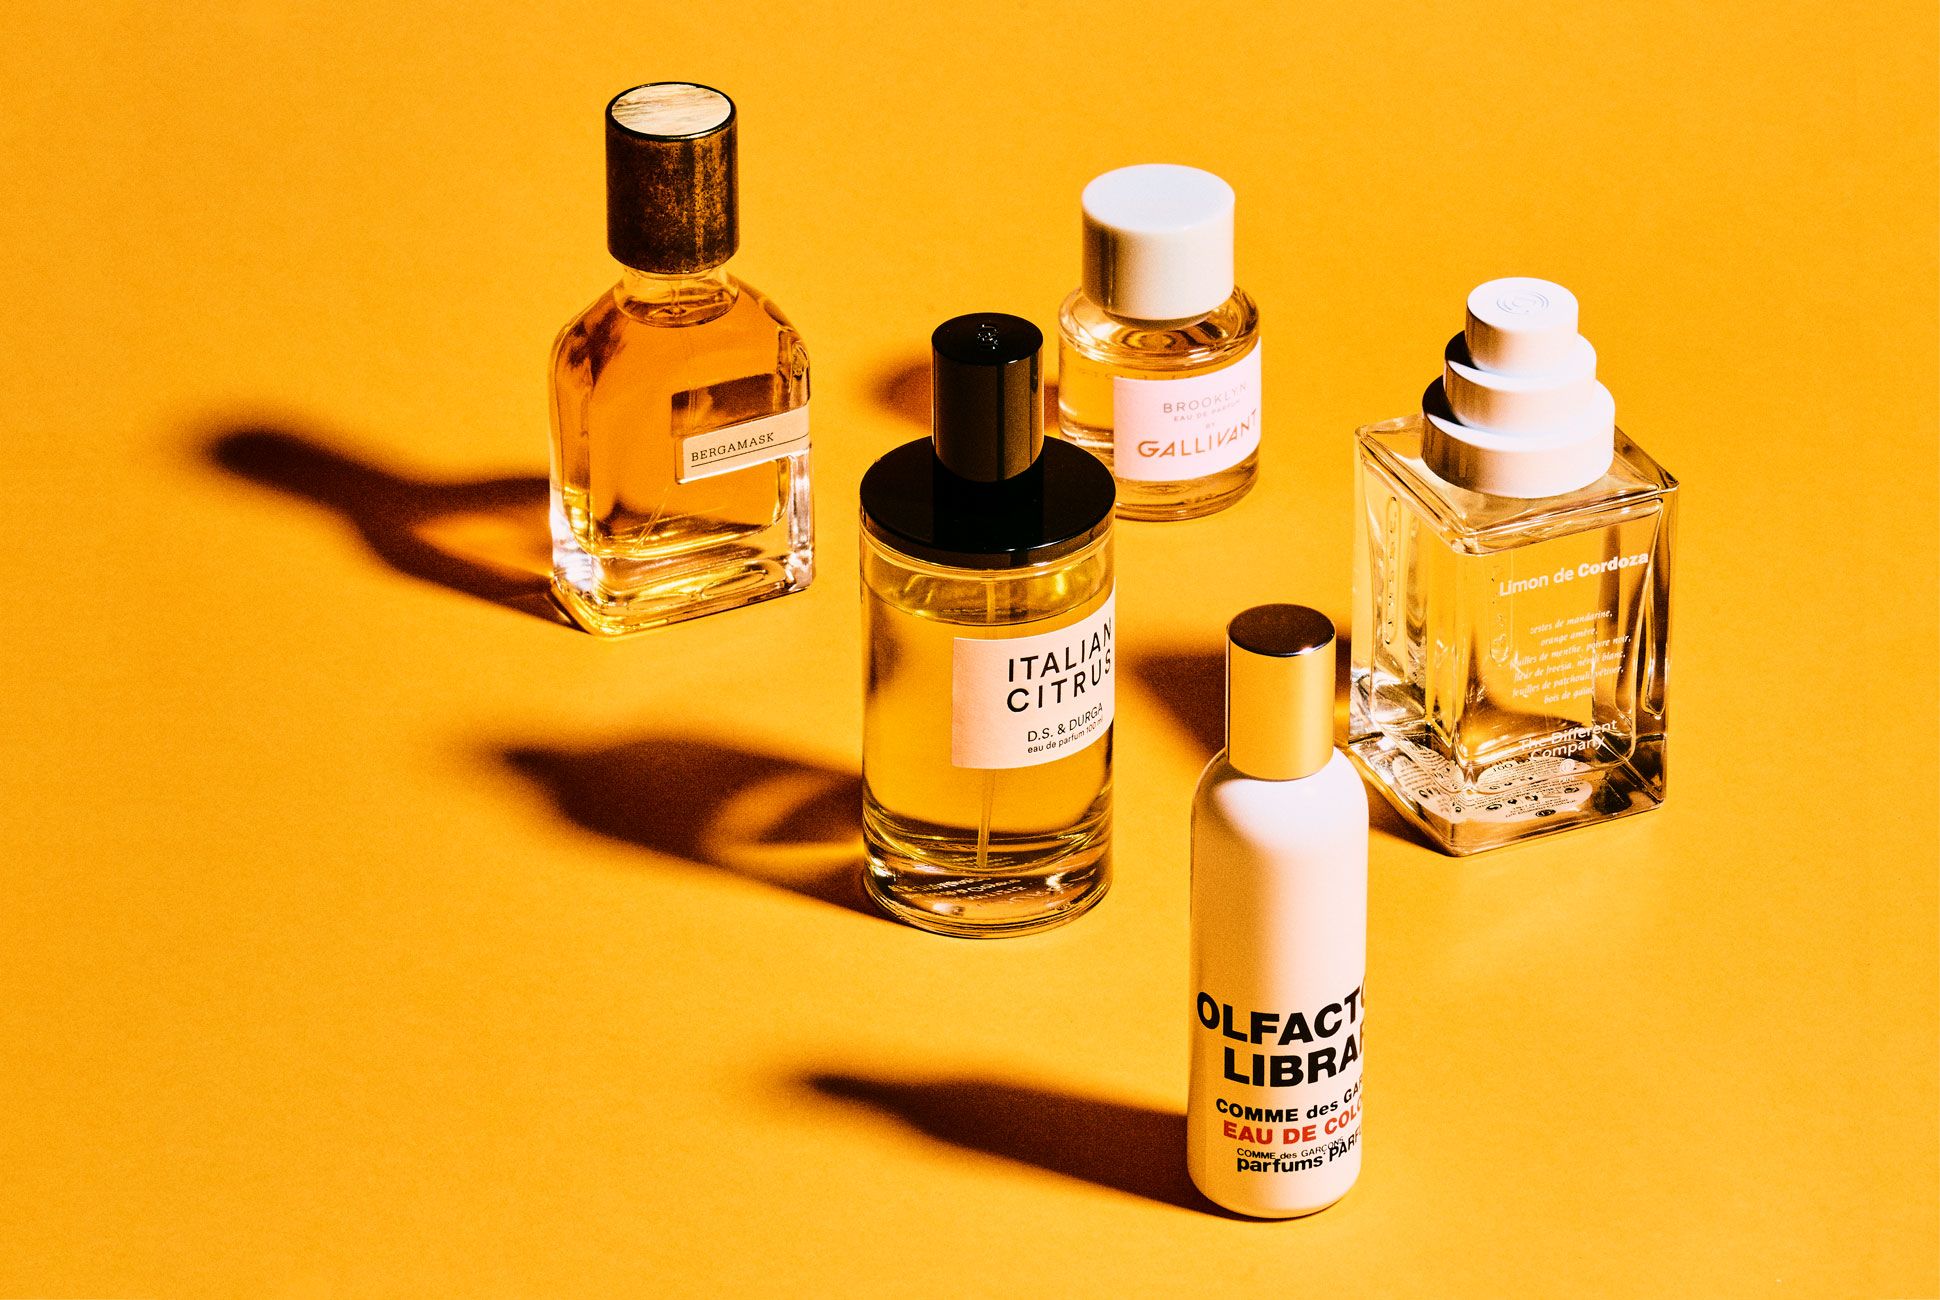 How to Apply Fragrance, the Right Way